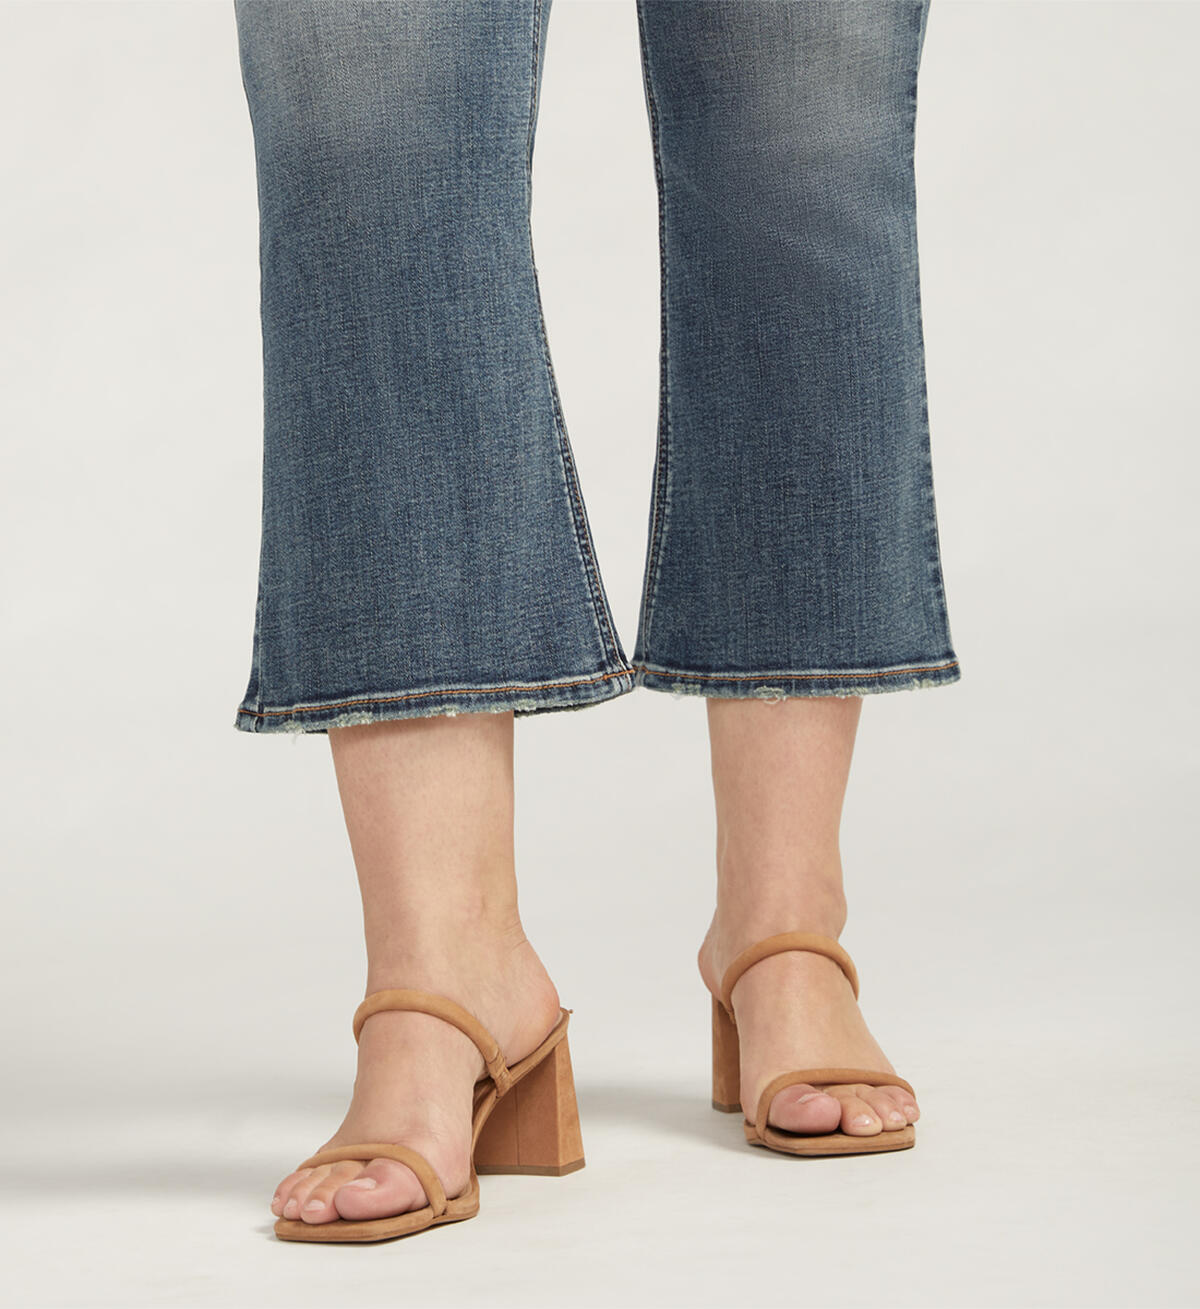 Suki Mid Rise Cropped Flare Jeans Plus Size, , hi-res image number 3